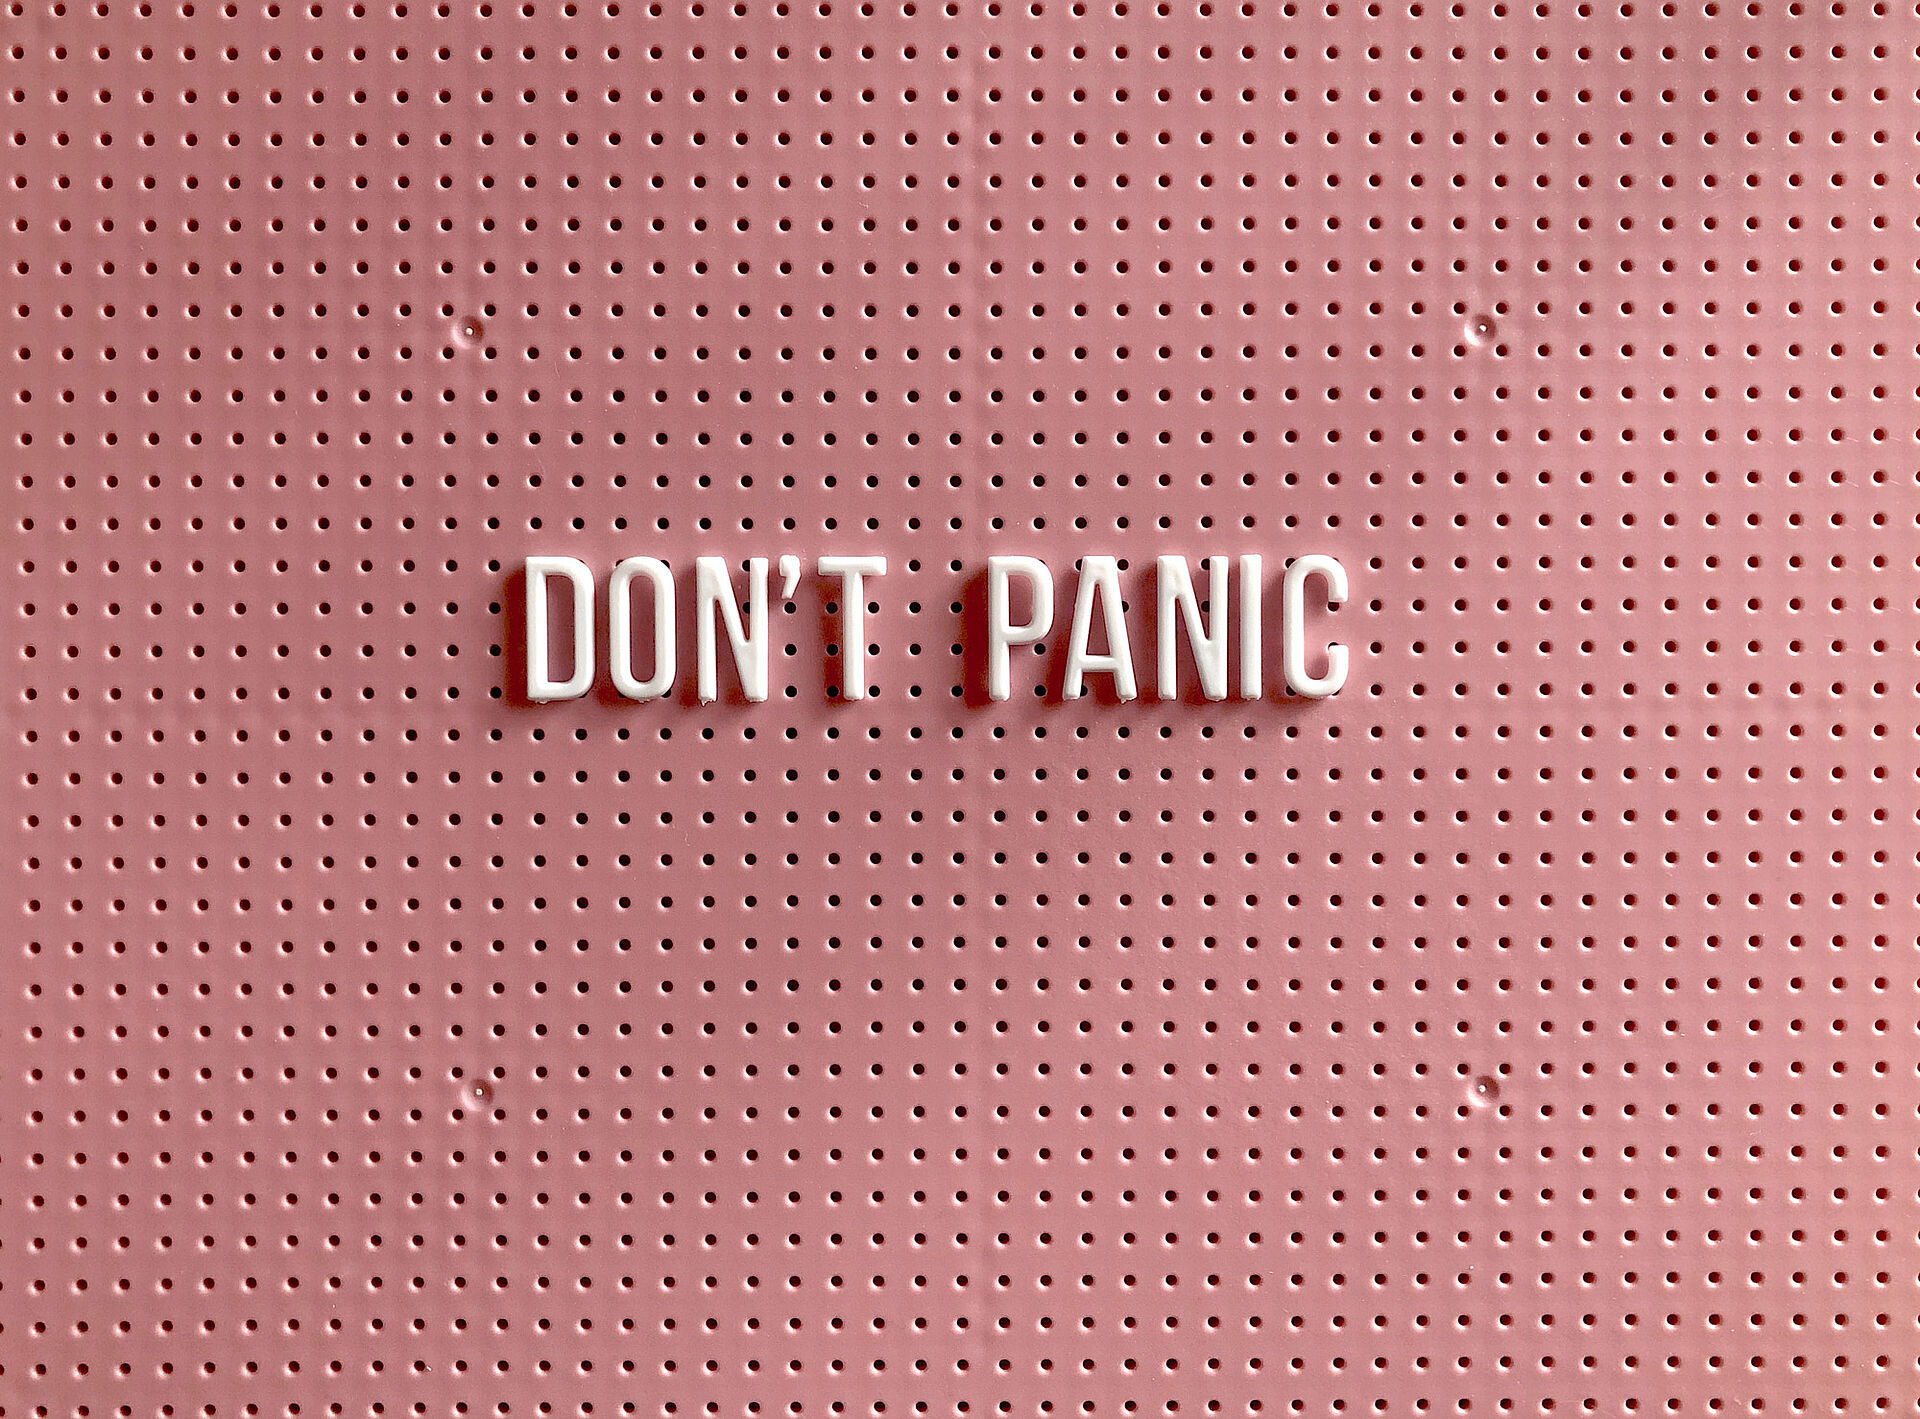 Lettering "Don't Panic" on pink background